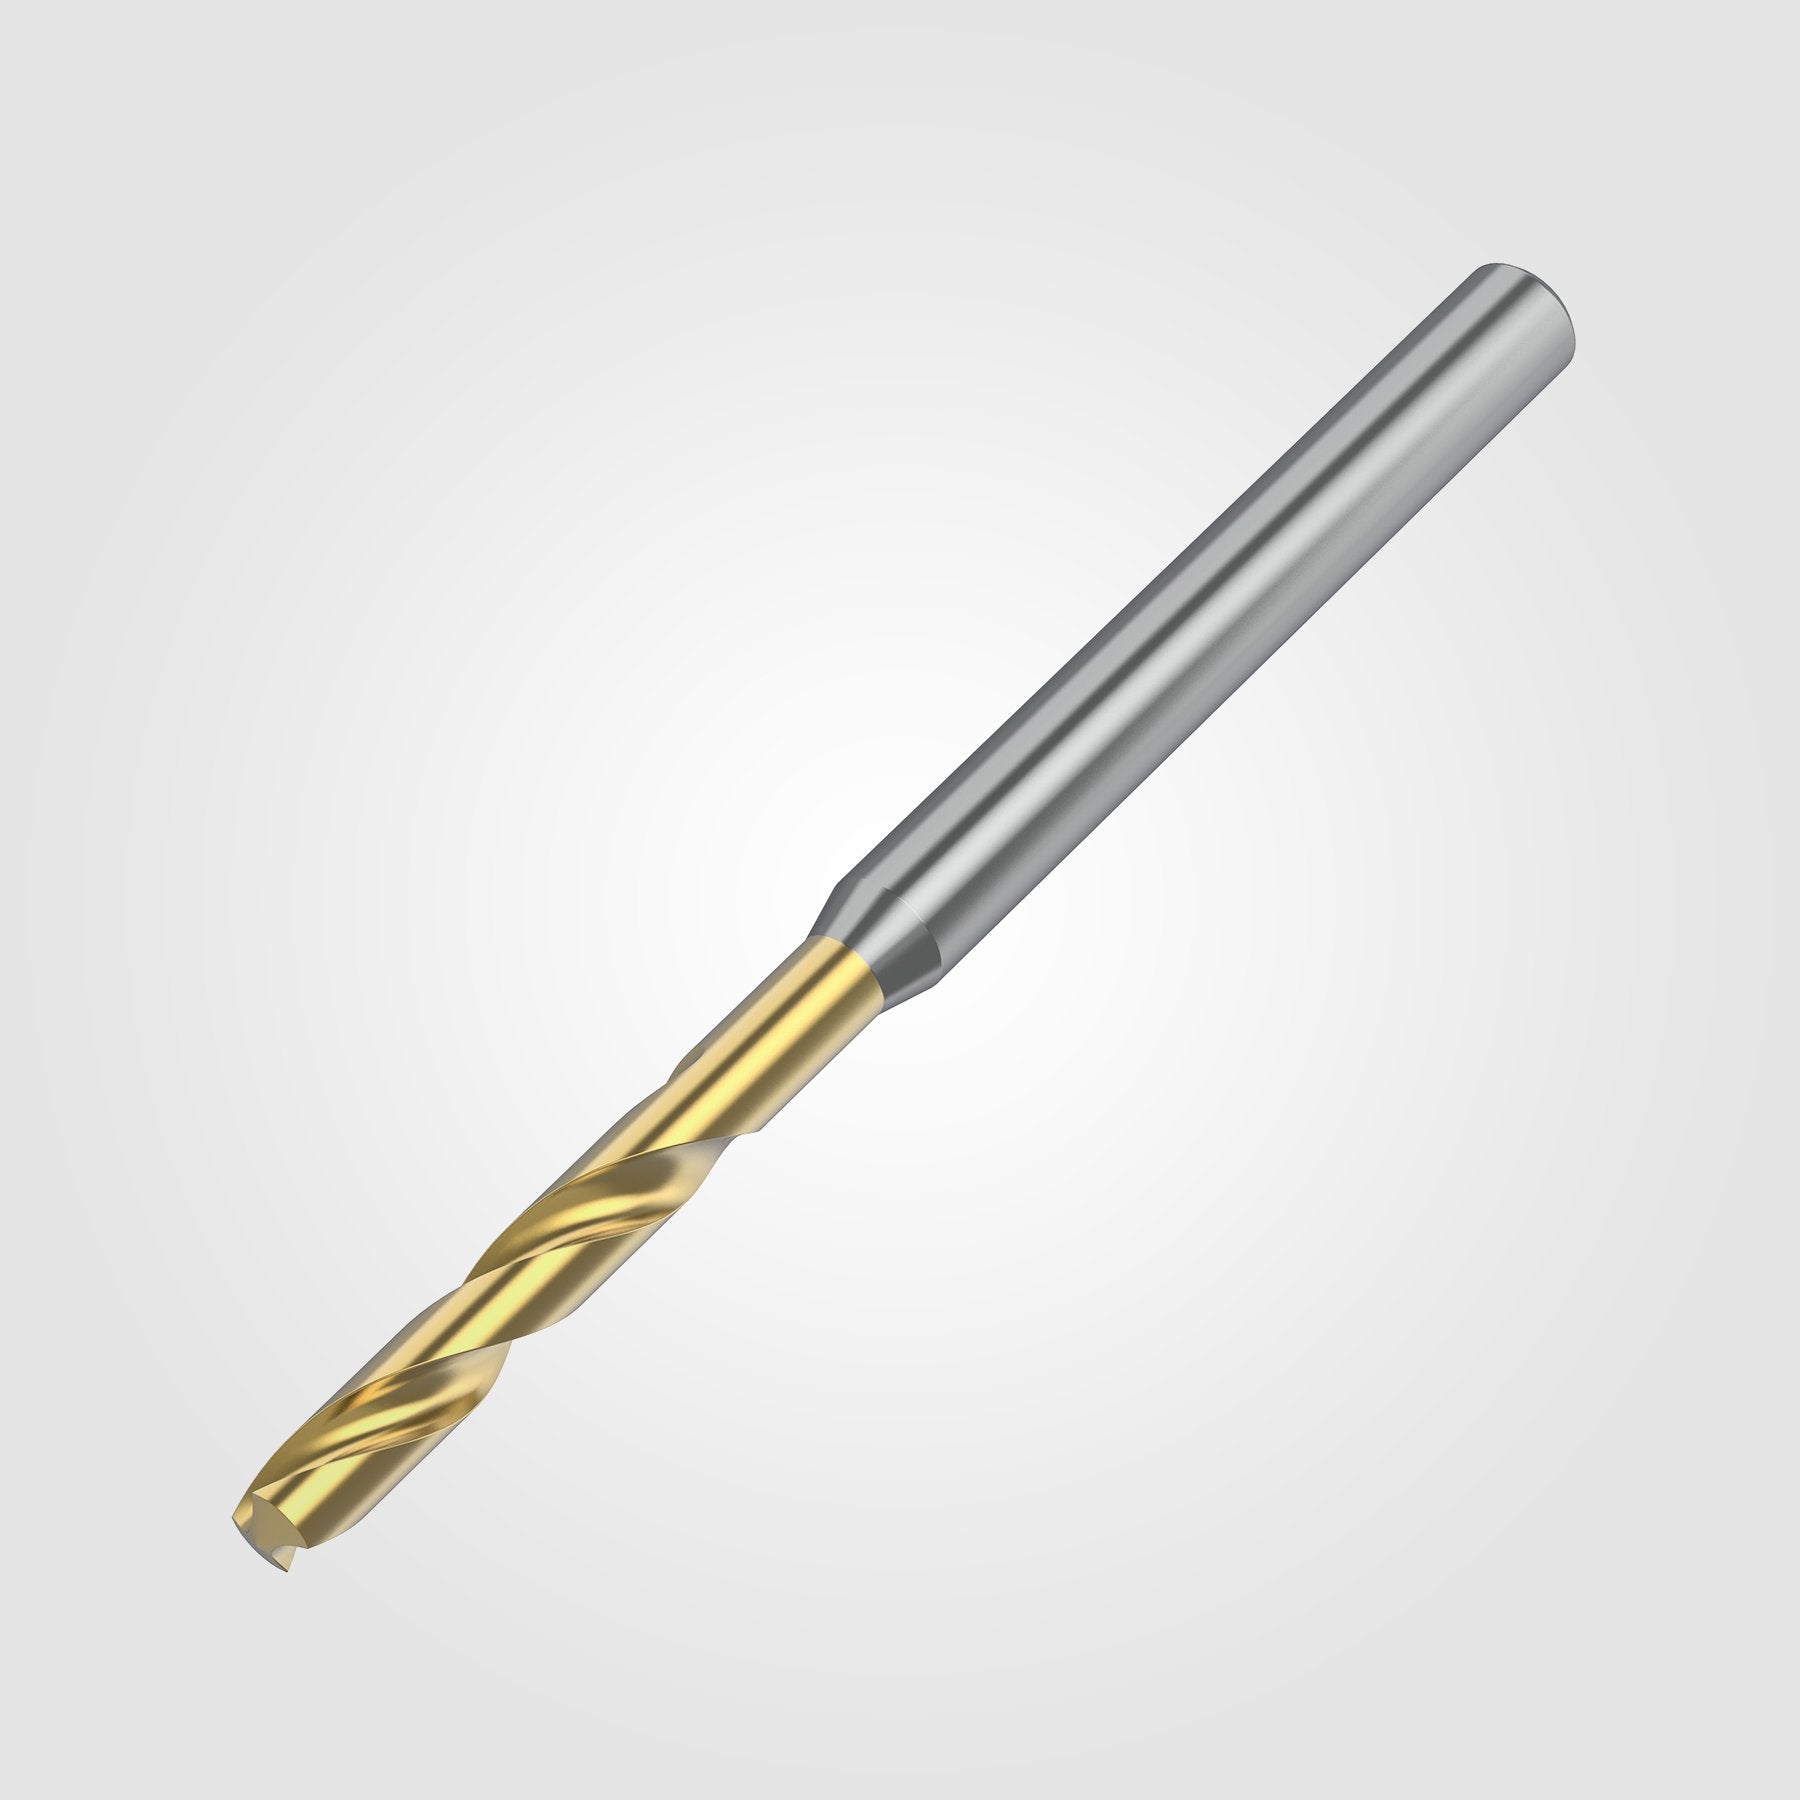 GOdrill (THROUGH COOLANT) | 1.7mm / .0669" / 3xD | SOLID CARBIDE DRILL | 4148806